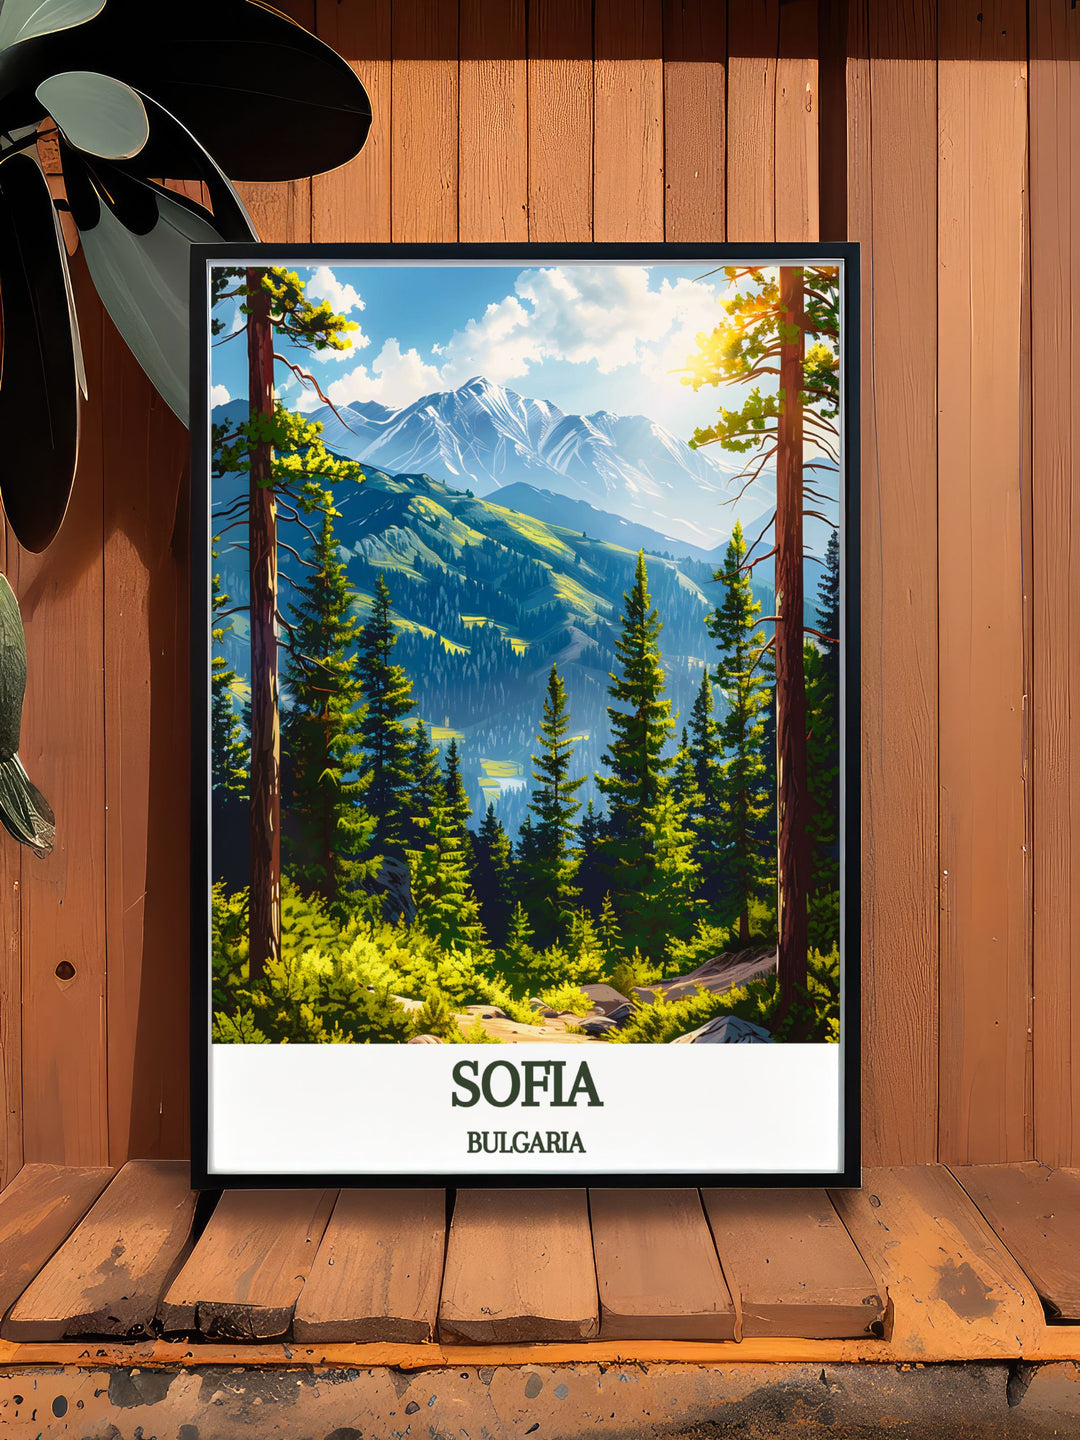 High quality Sofia Photo of BULGARIA Vitosha mountain showcasing its stunning natural beauty perfect for adding a sophisticated touch to your home or office.